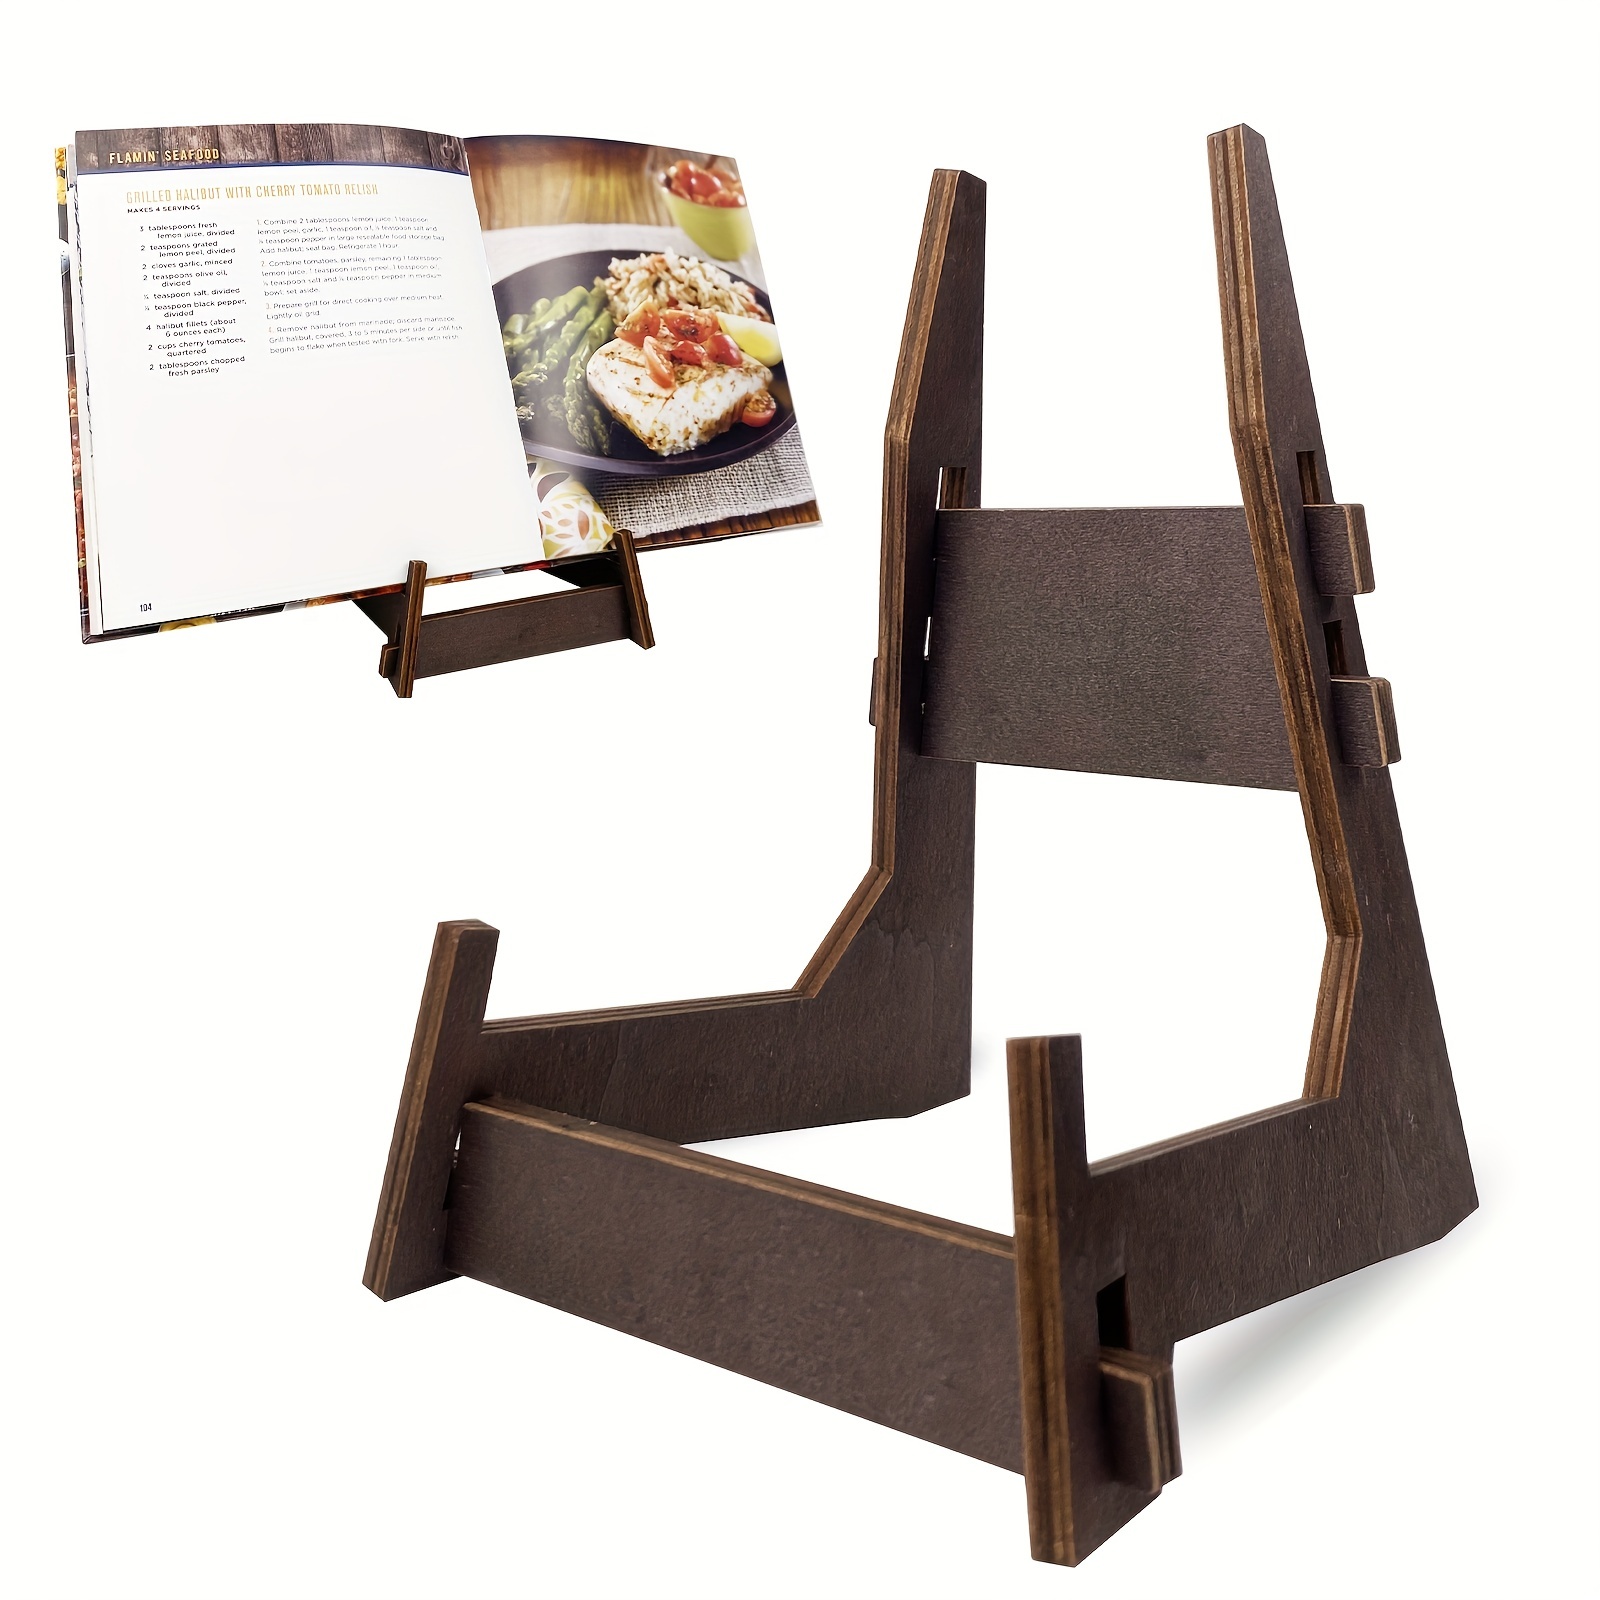  FEMELI Clear Book Holder, Acrylic Book Stands for Cook Book  Display,Large Sturdy Open Reading Magzine Holder for Textbook, Bible, Easel  in Tabletop and Kitchen : Office Products